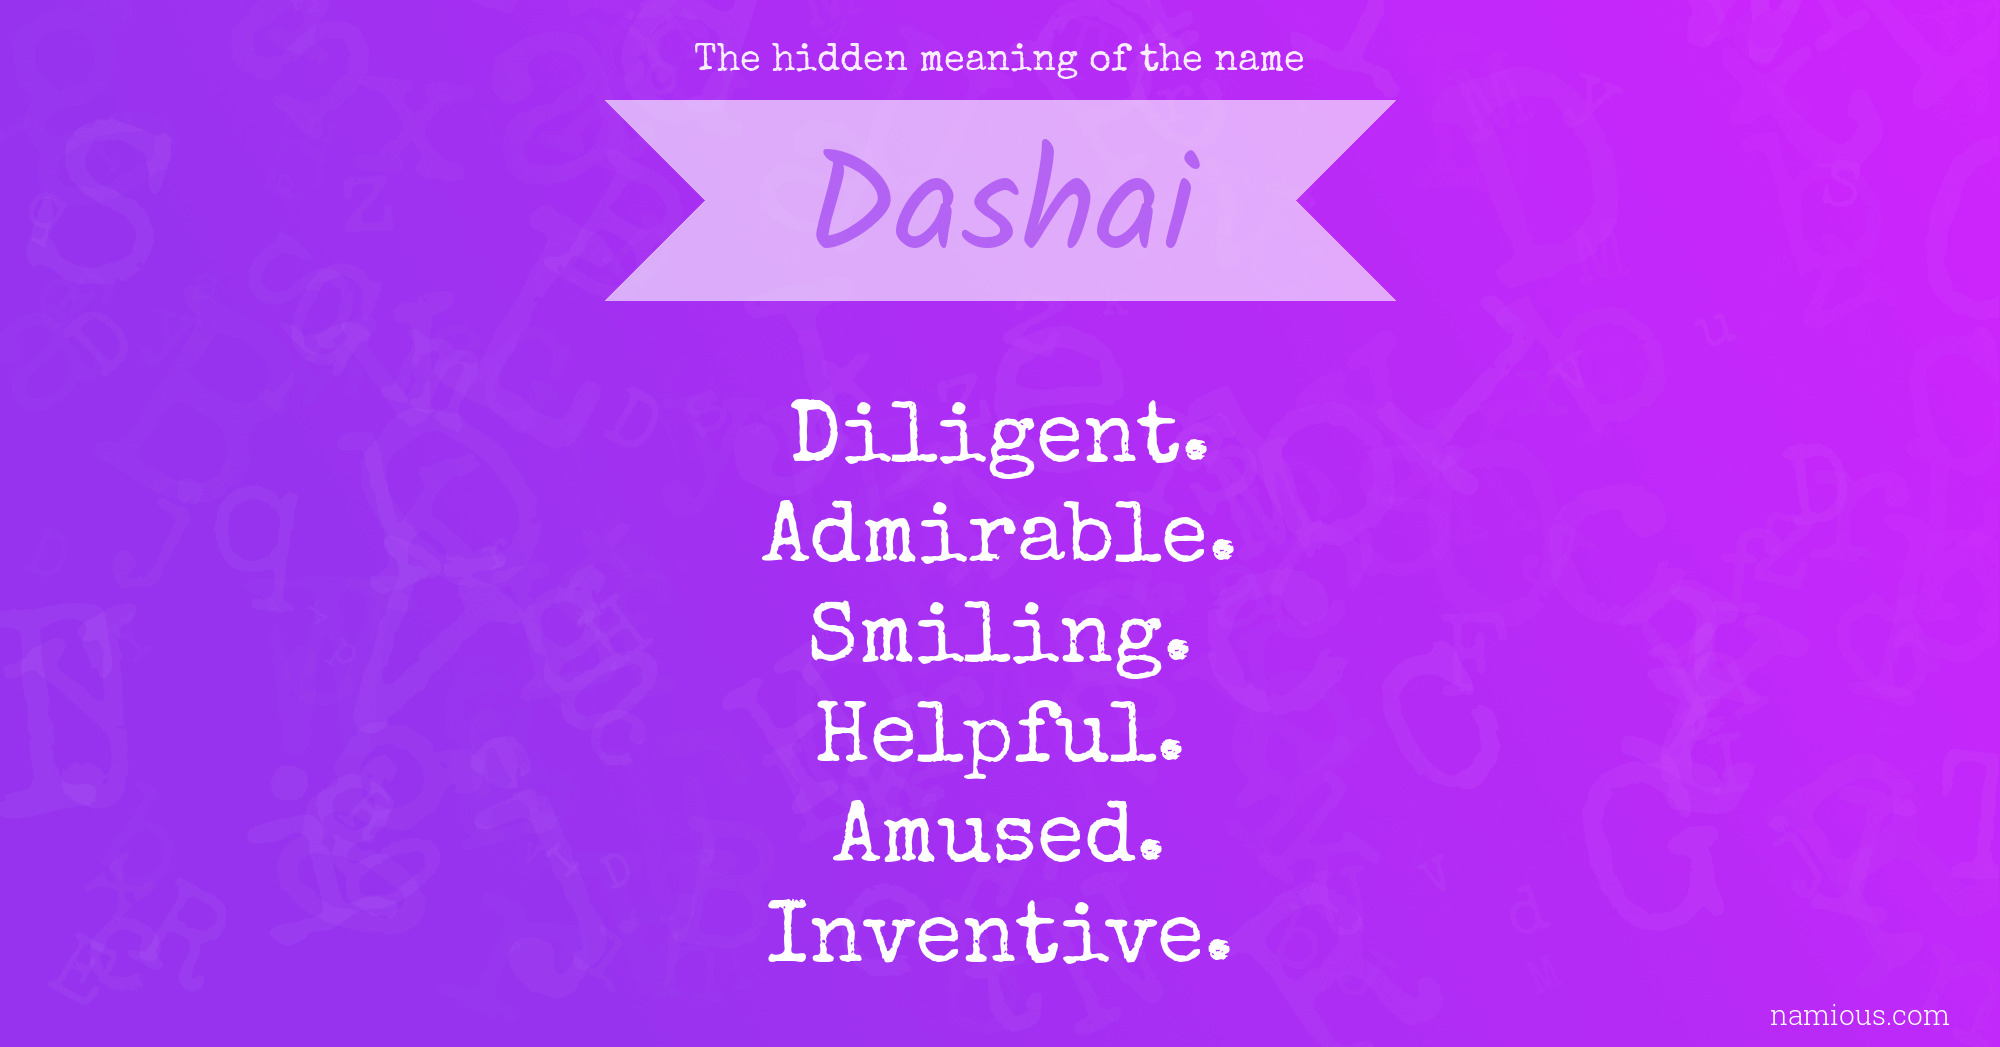 The hidden meaning of the name Dashai